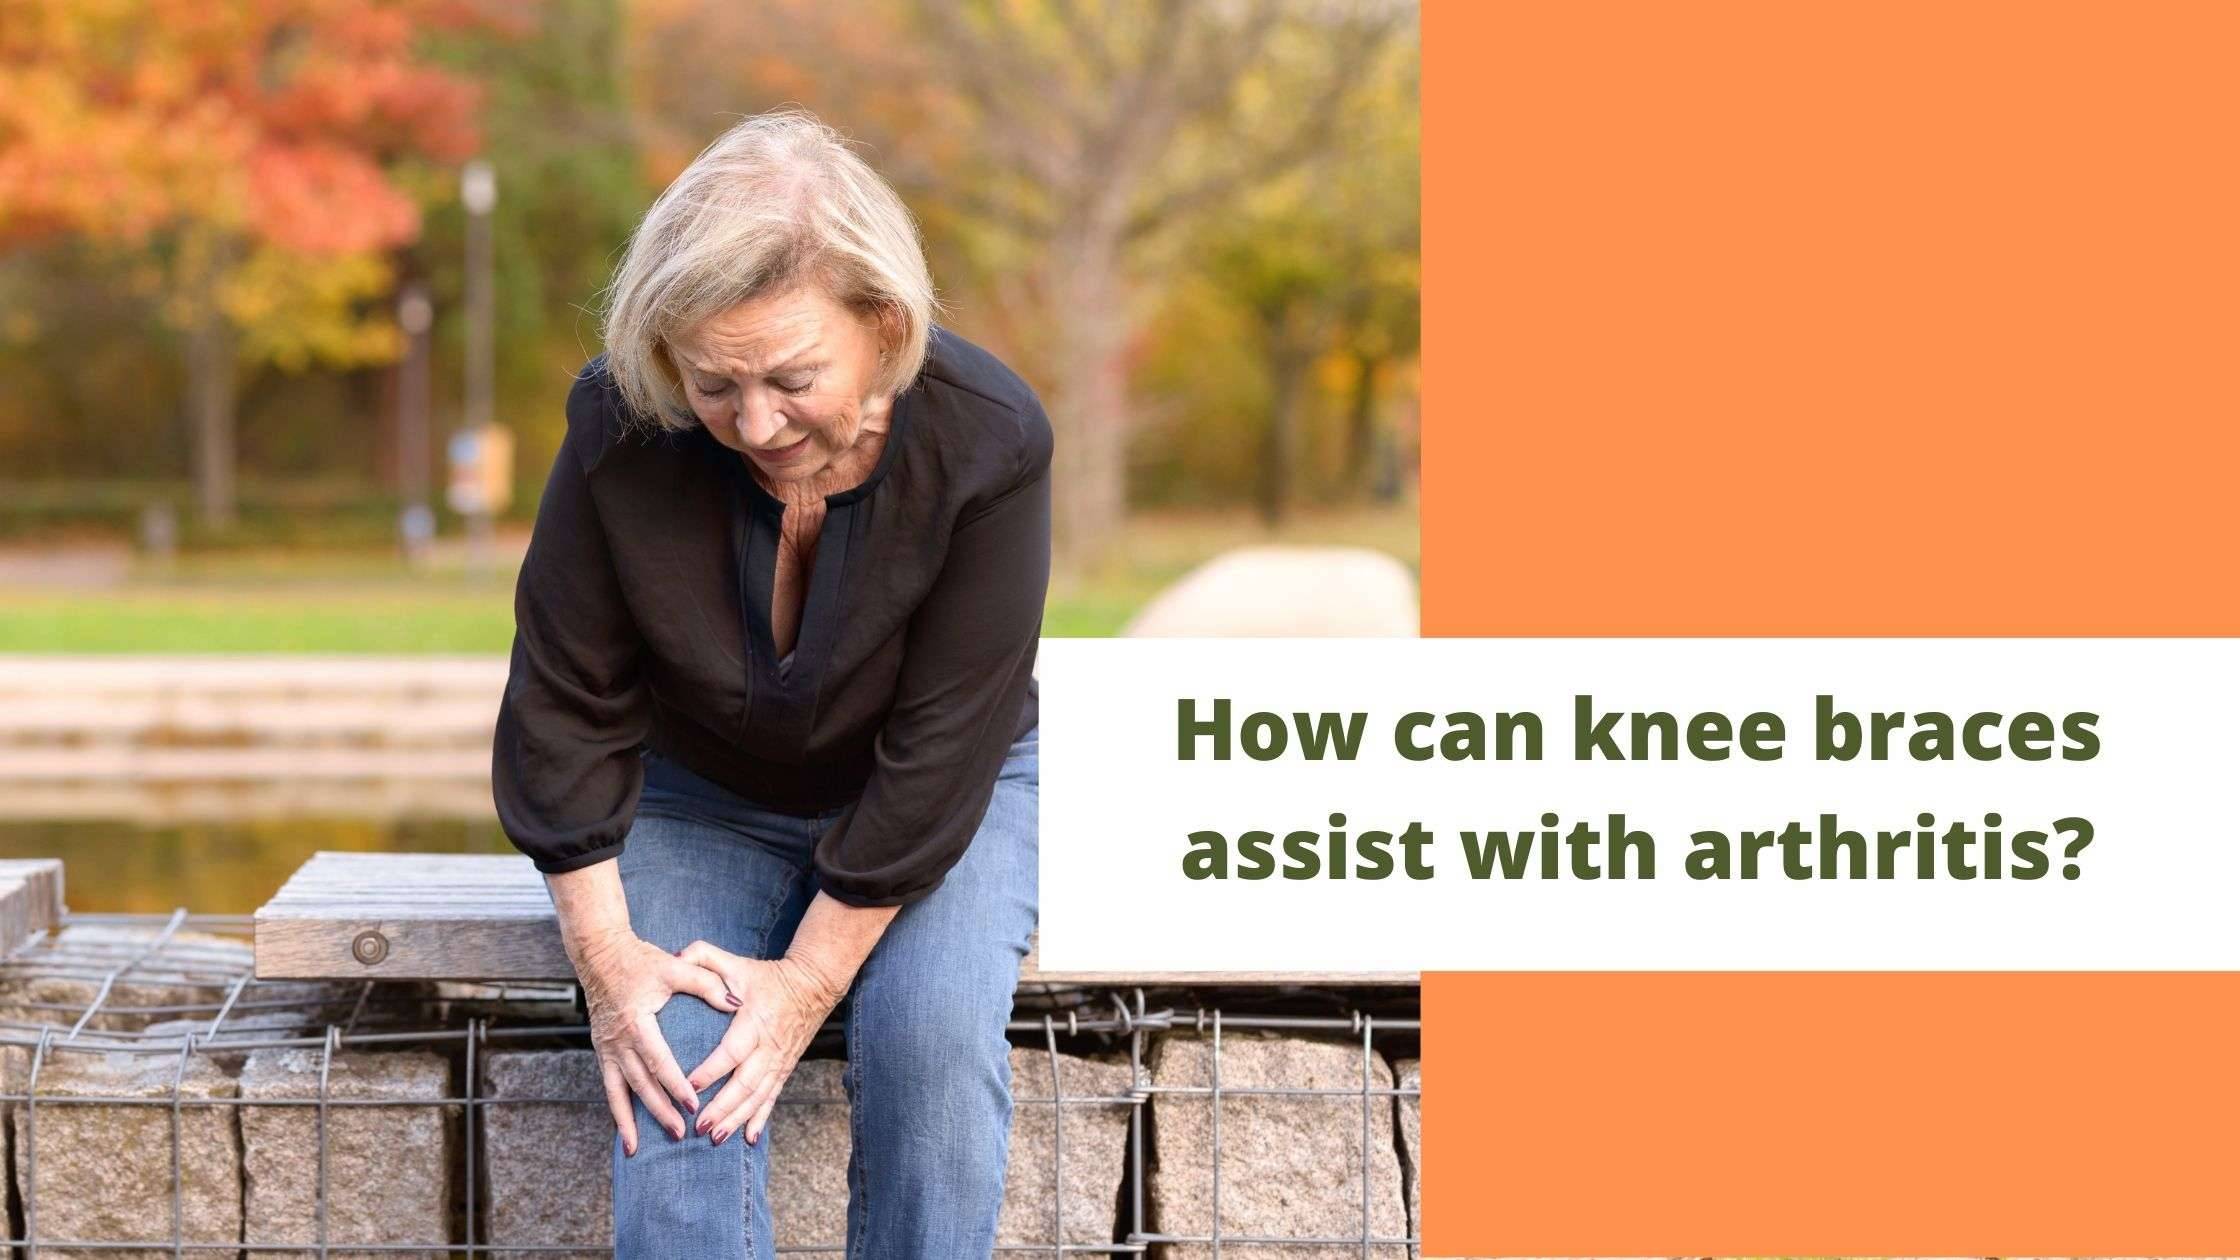 How can knee braces assist with arthritis?